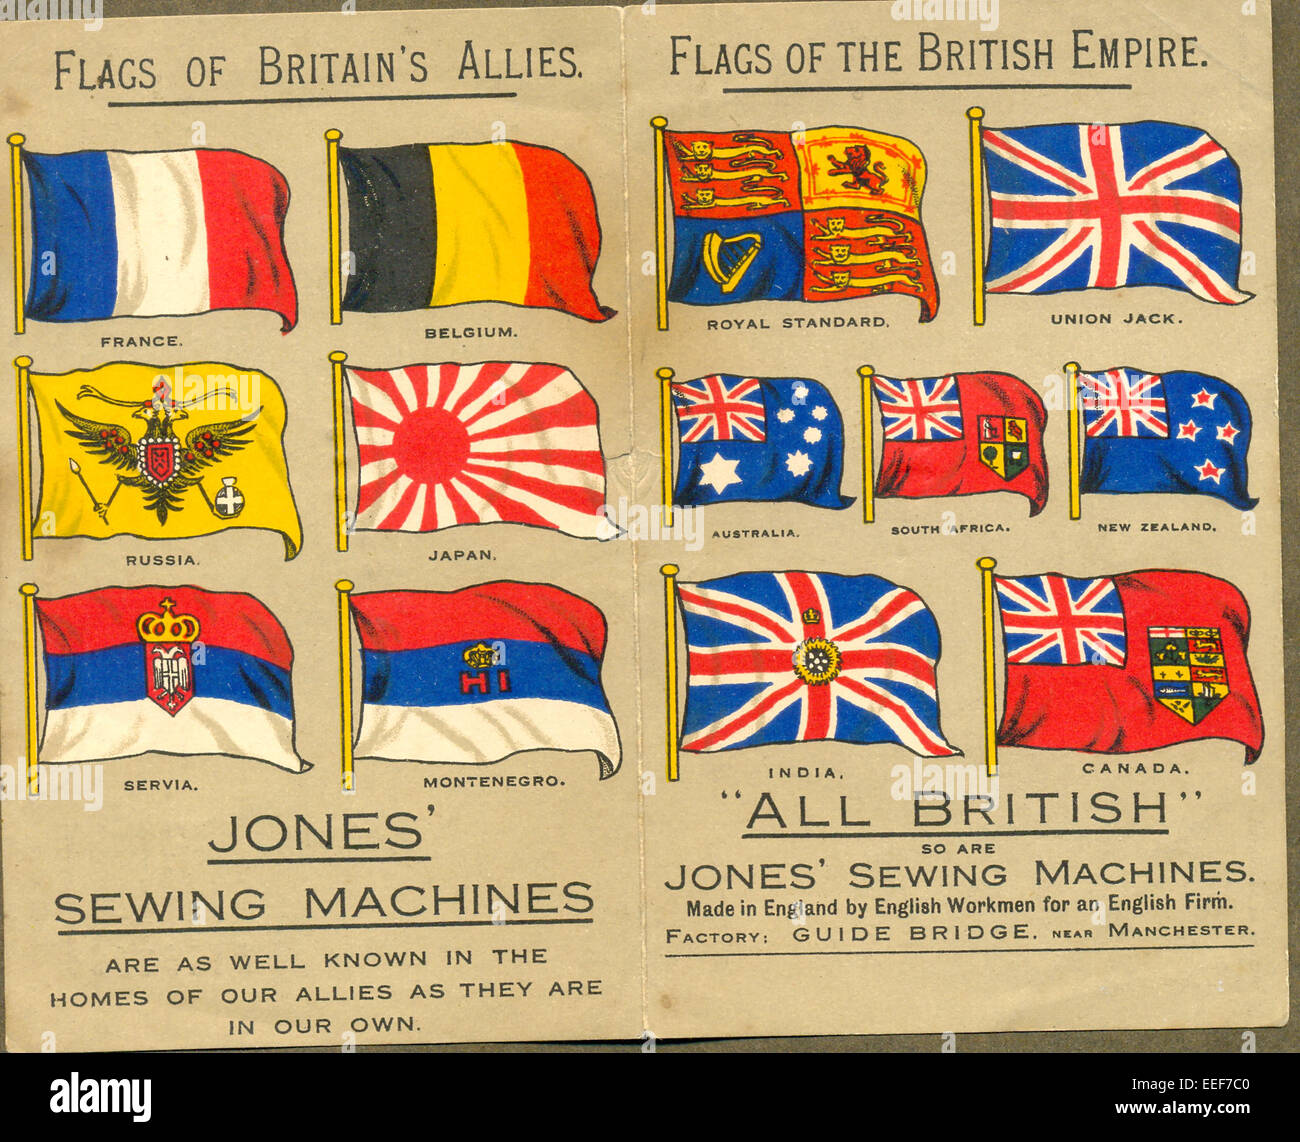 World War One flags on advertising leaflet for Jones' Sewing machines Stock Photo